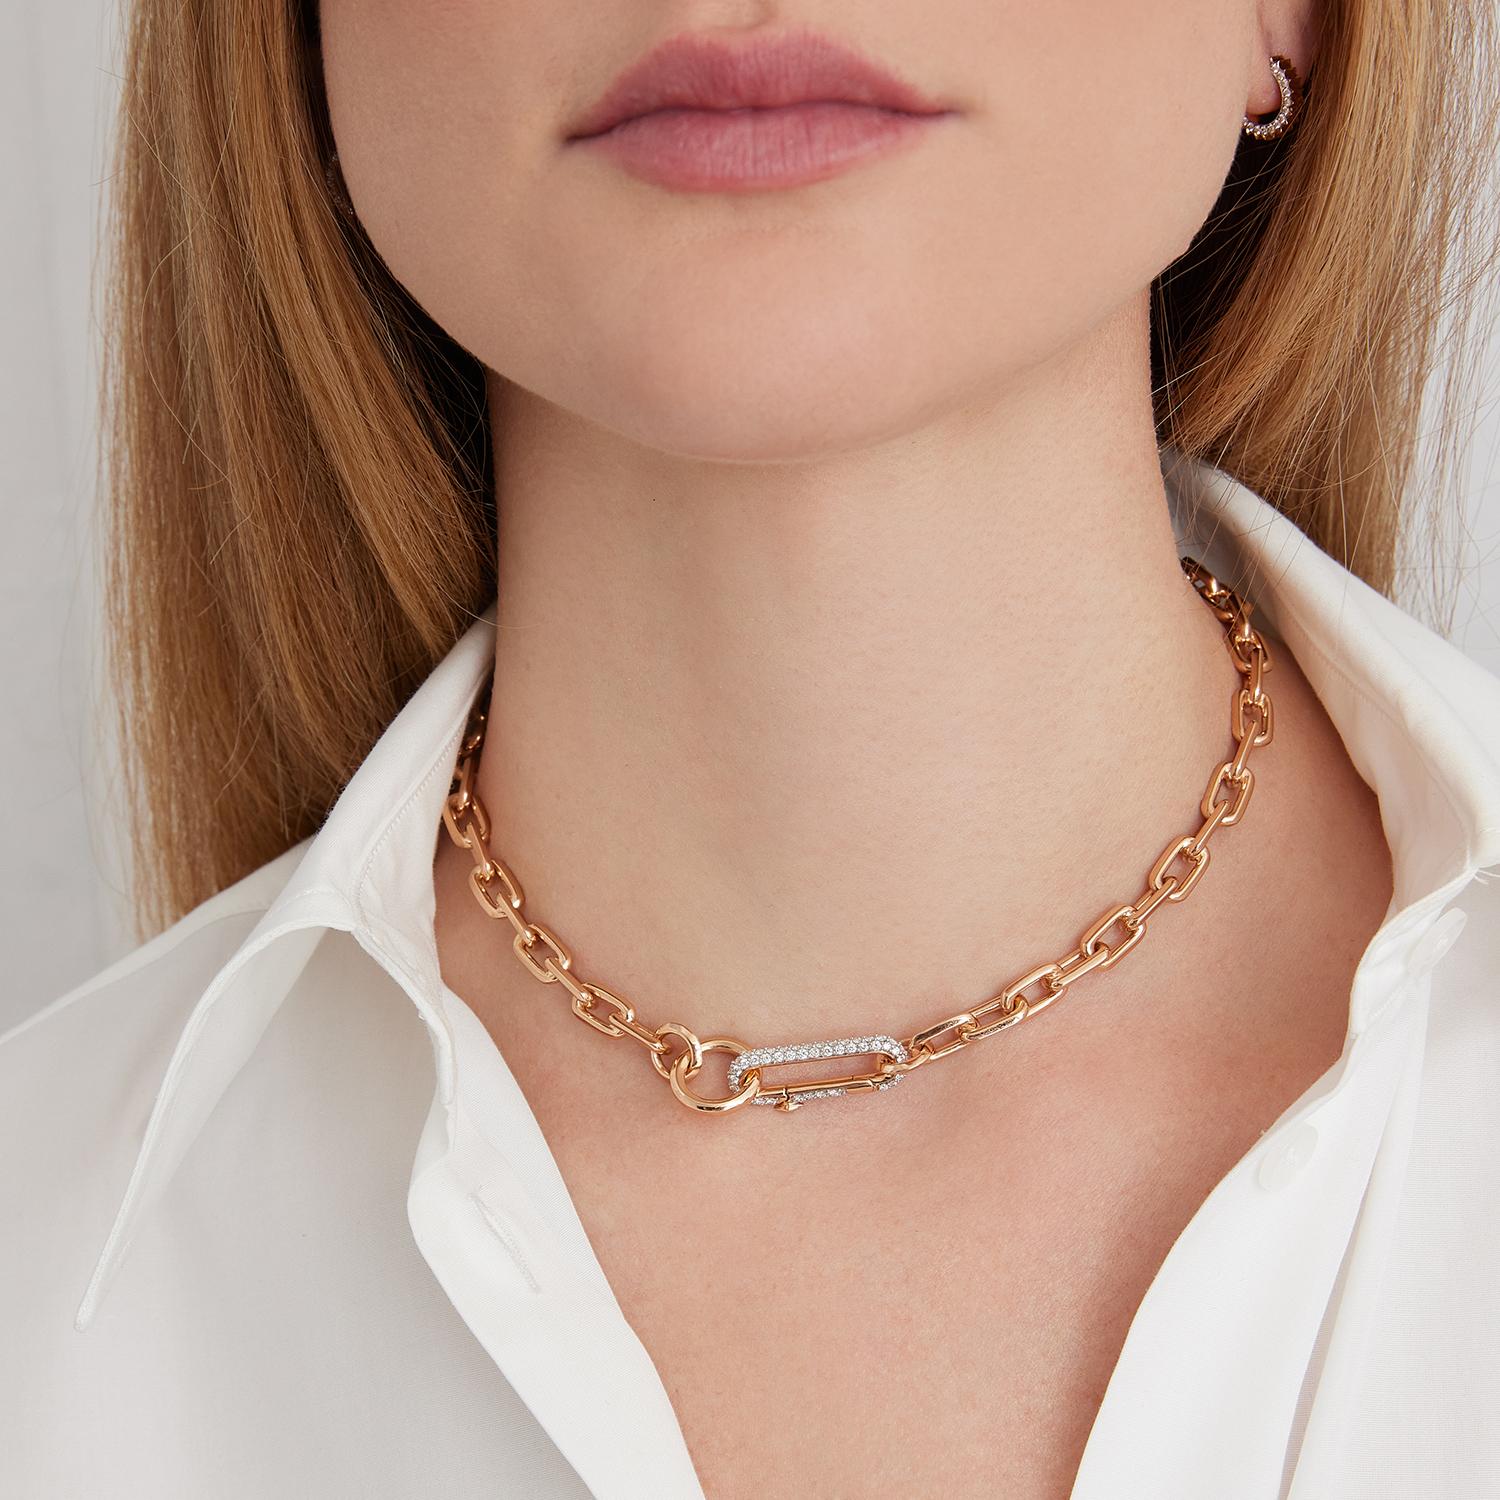 Walters Faith's Saxon collection 18K Rose Gold Chain Link Necklace with Elongated Diamond Link Clasp. 1.0 Diamond Carat Weight. Links are solid, not hollow. Necklace measures 11.5mm W x 15